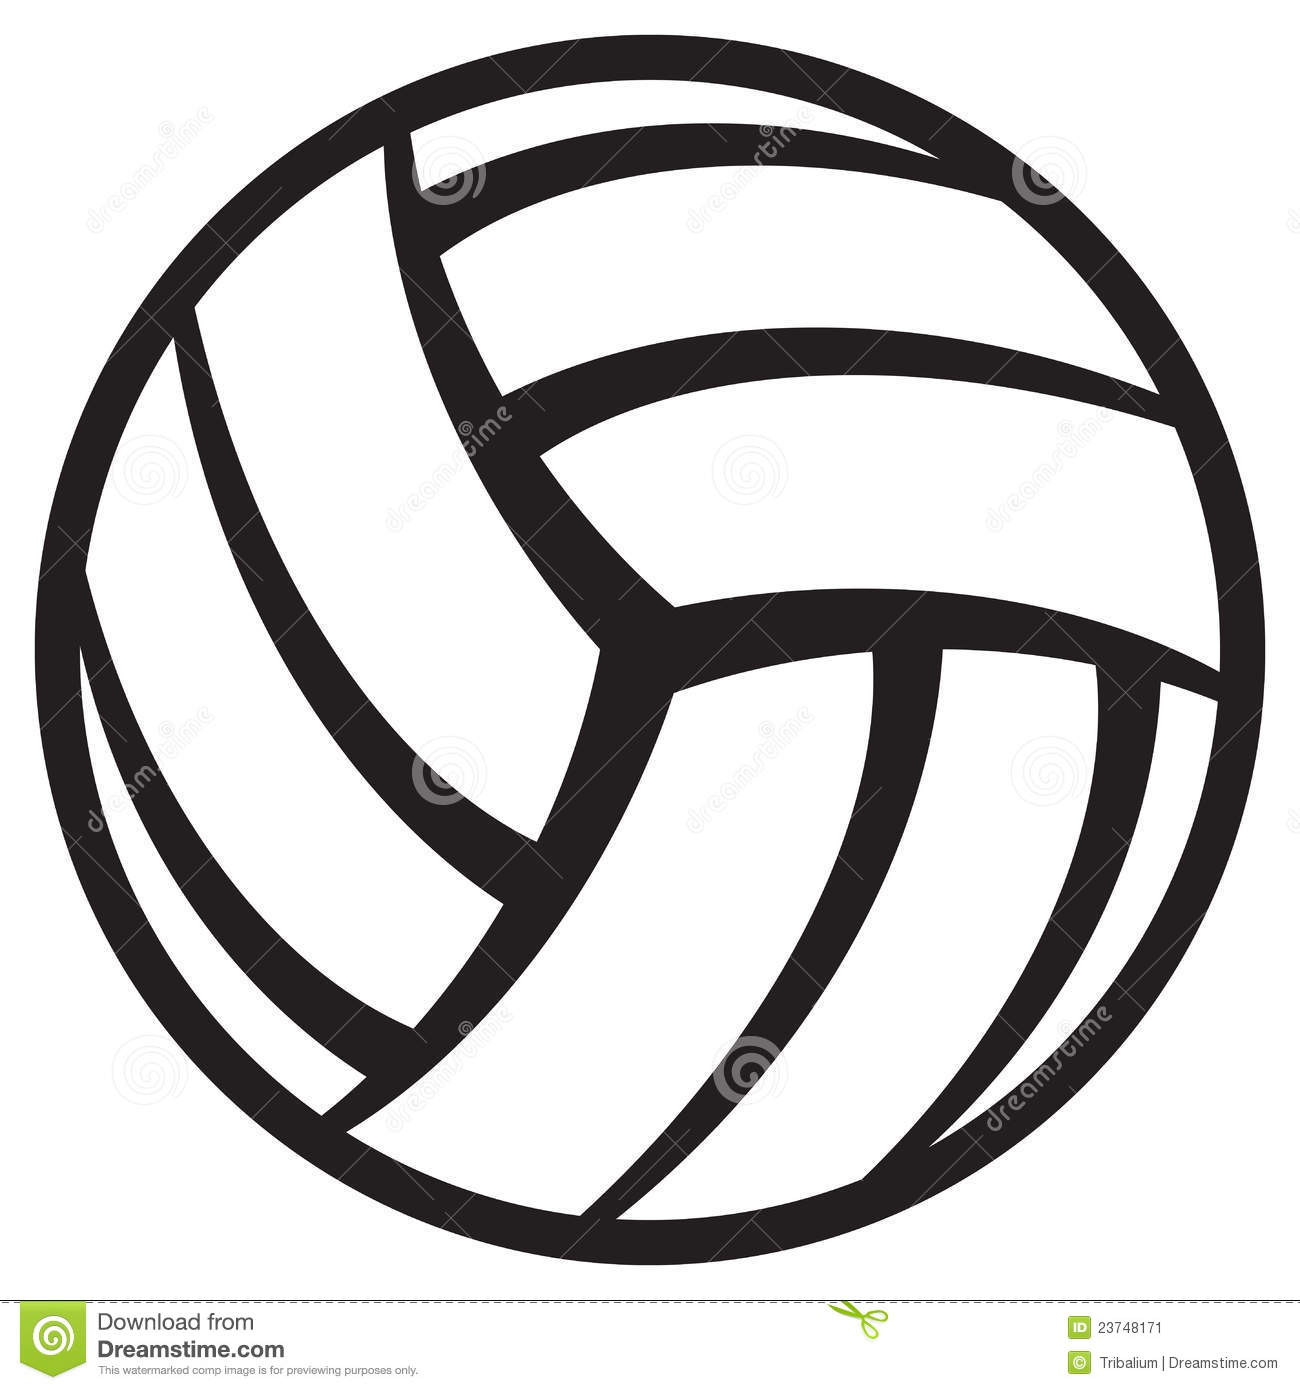 Volleyball stock illustrations 3 volleyball stock